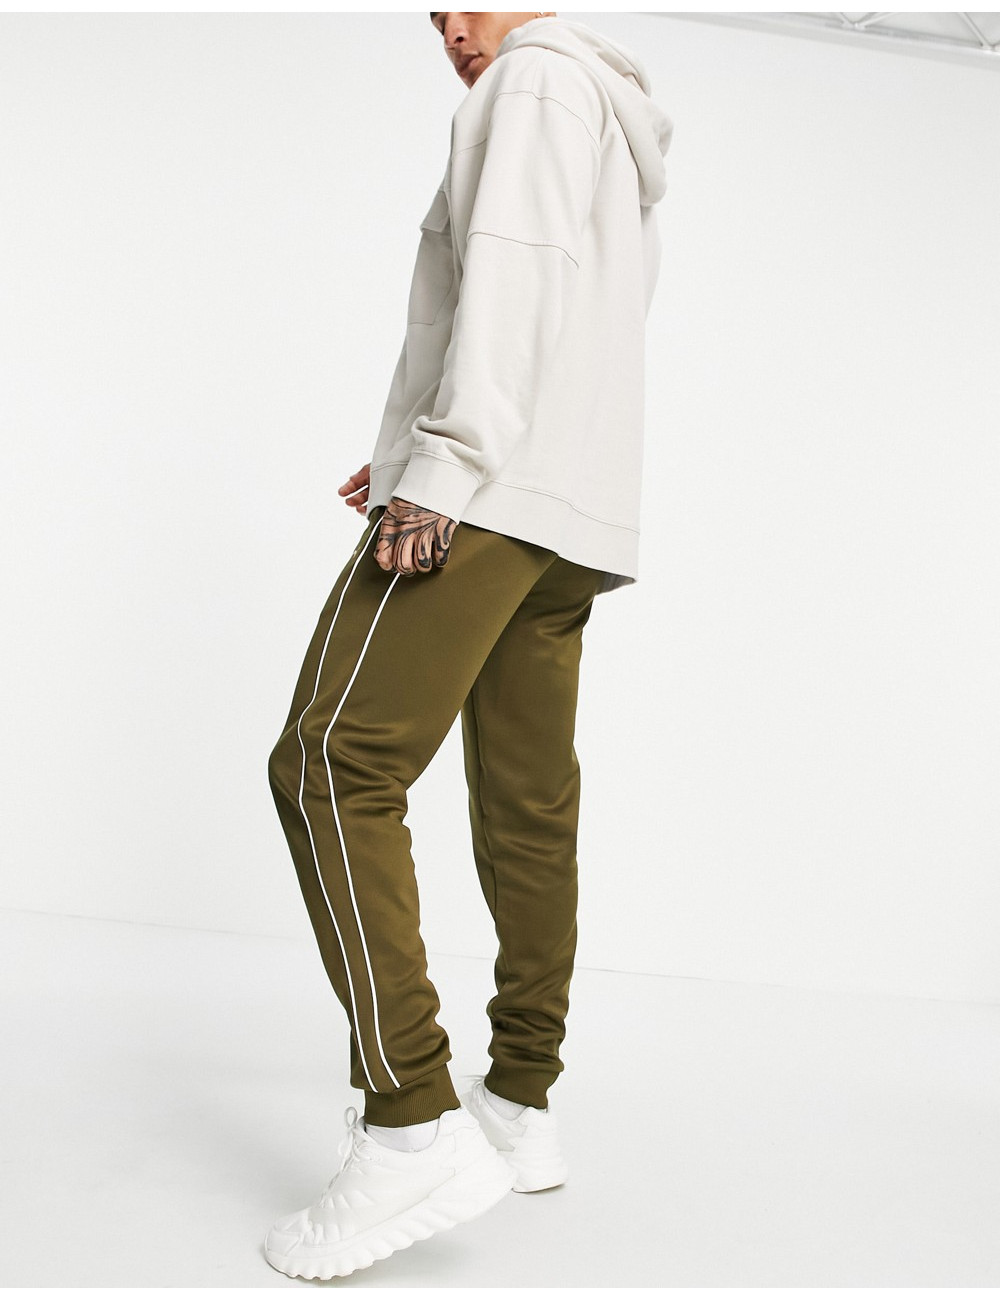 Puma Suede track pants in...